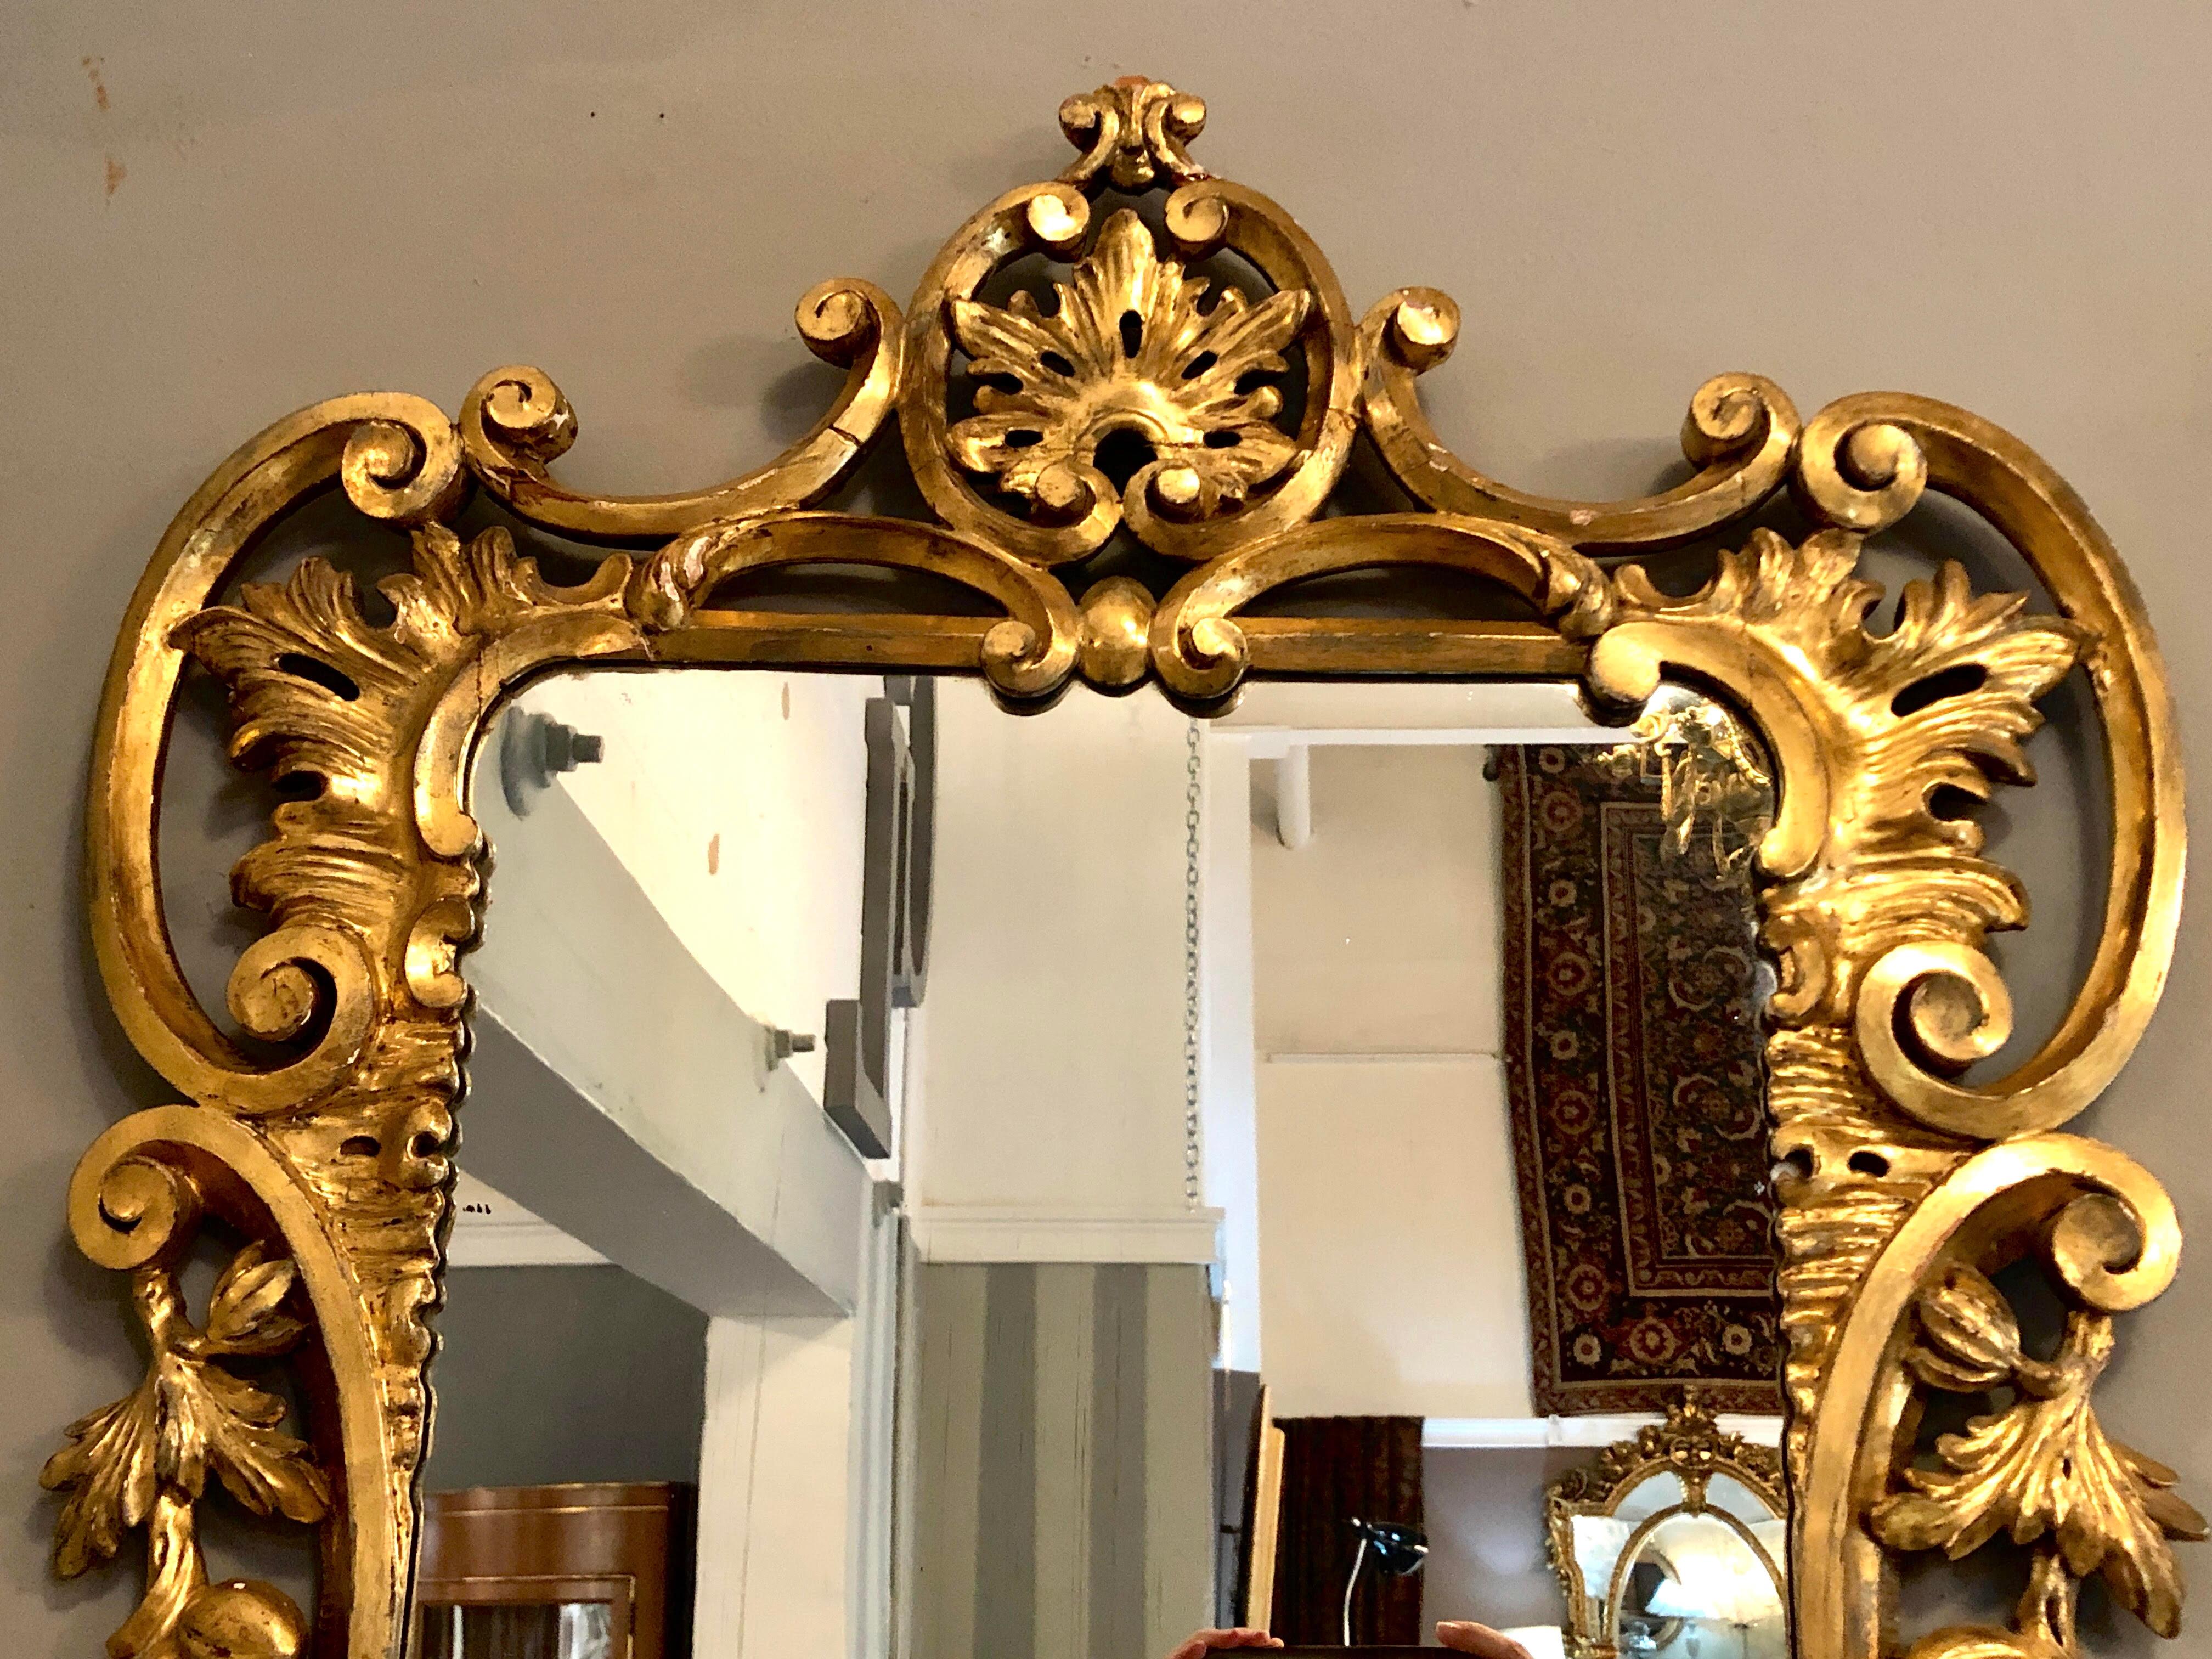 19th-20th century giltwood continental wall, console or pier mirror. Finely gilt decorated wooded wall or console mirror having an all-around shell and leaf with grape or plum fruit carved design.